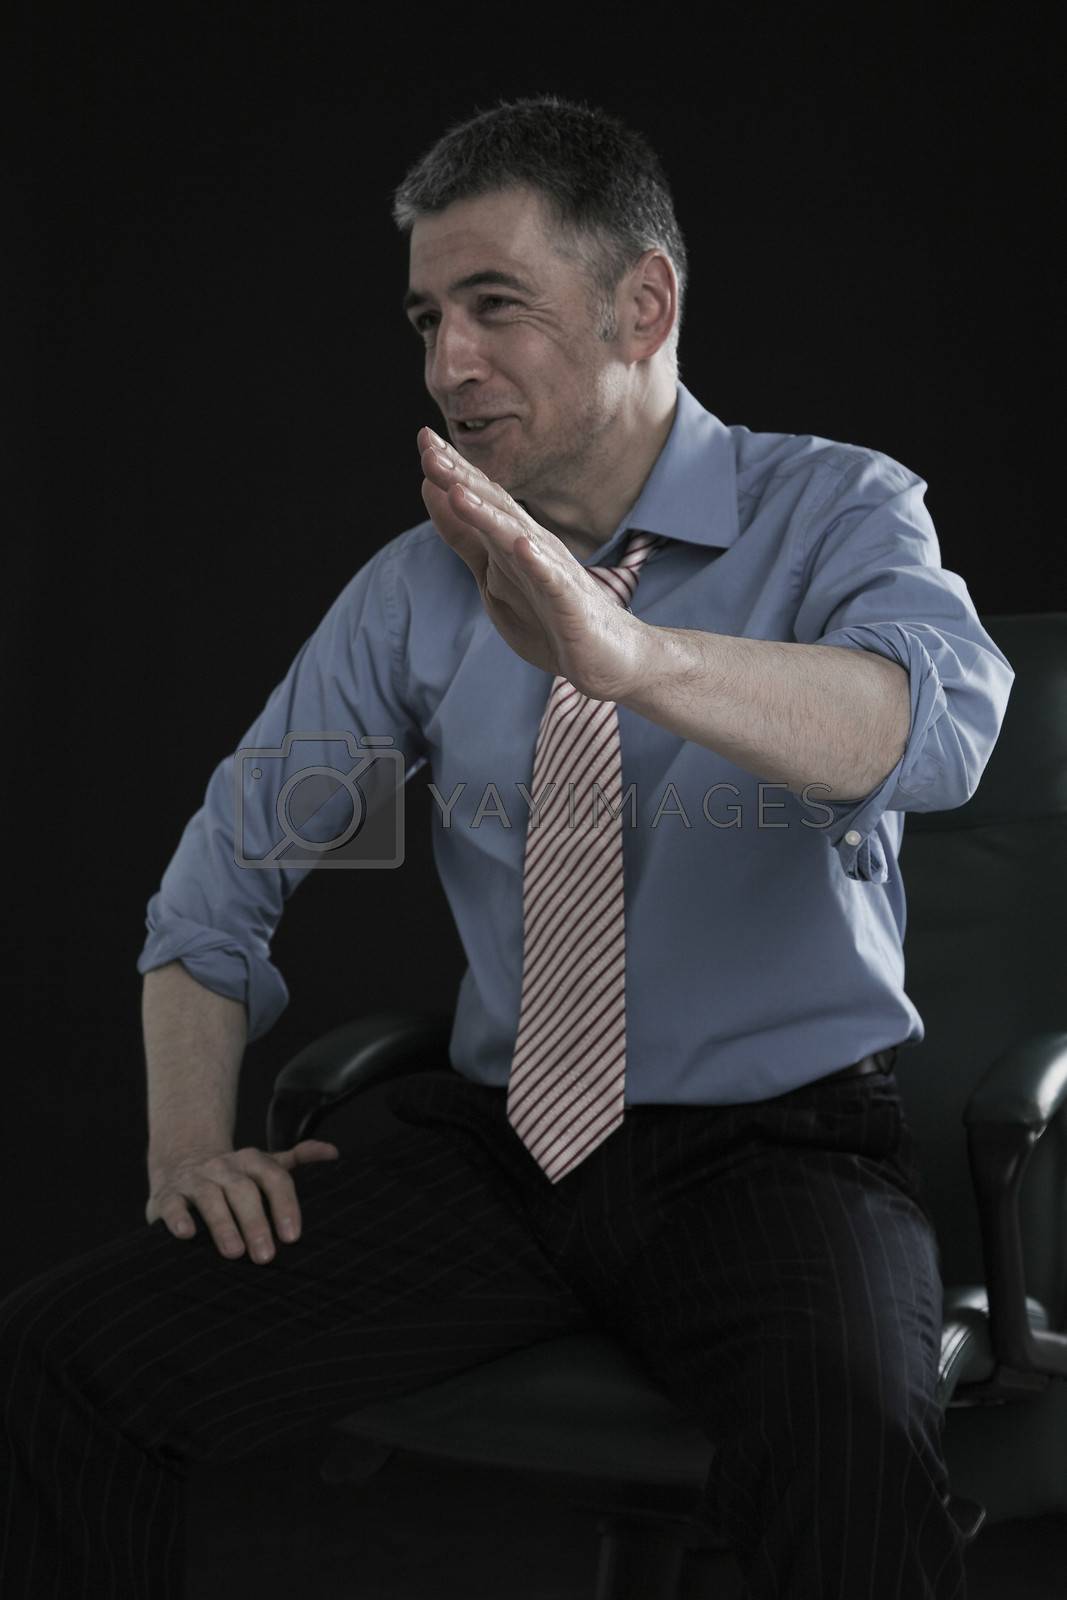 Royalty free image of Businessman Laughing and Gesturing by moodboard